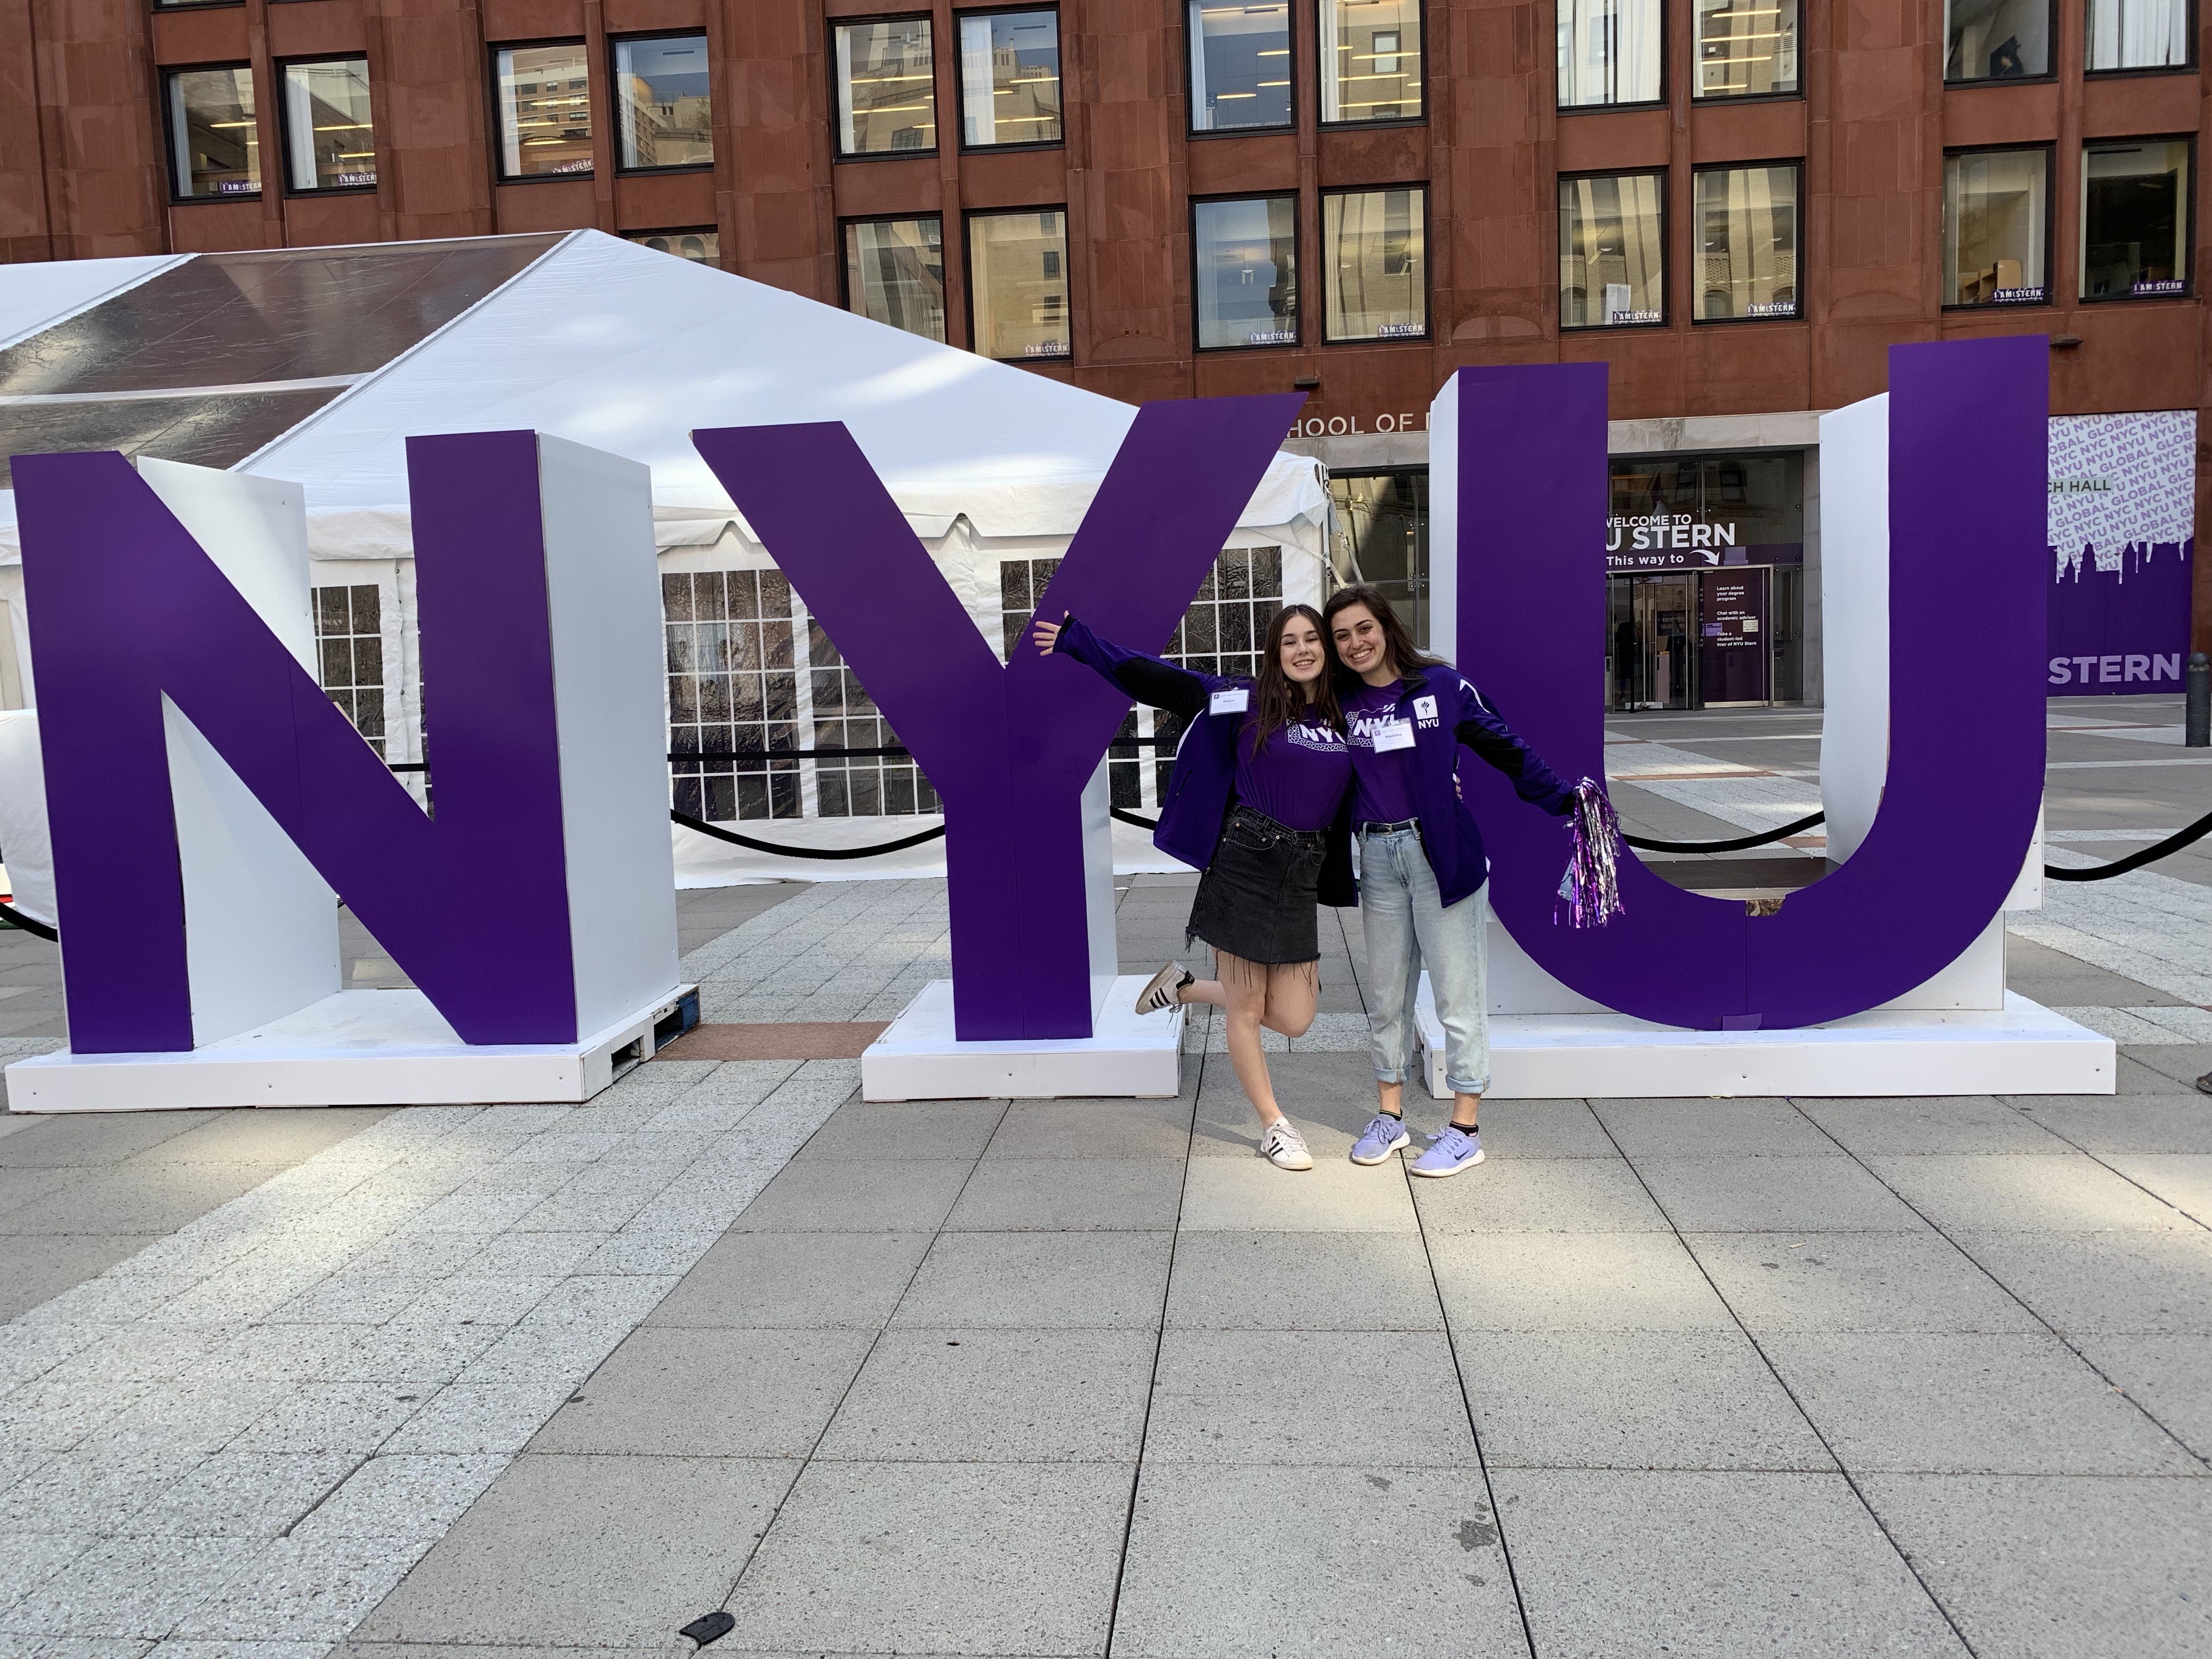 Two NYU Students in front of the NYU letters